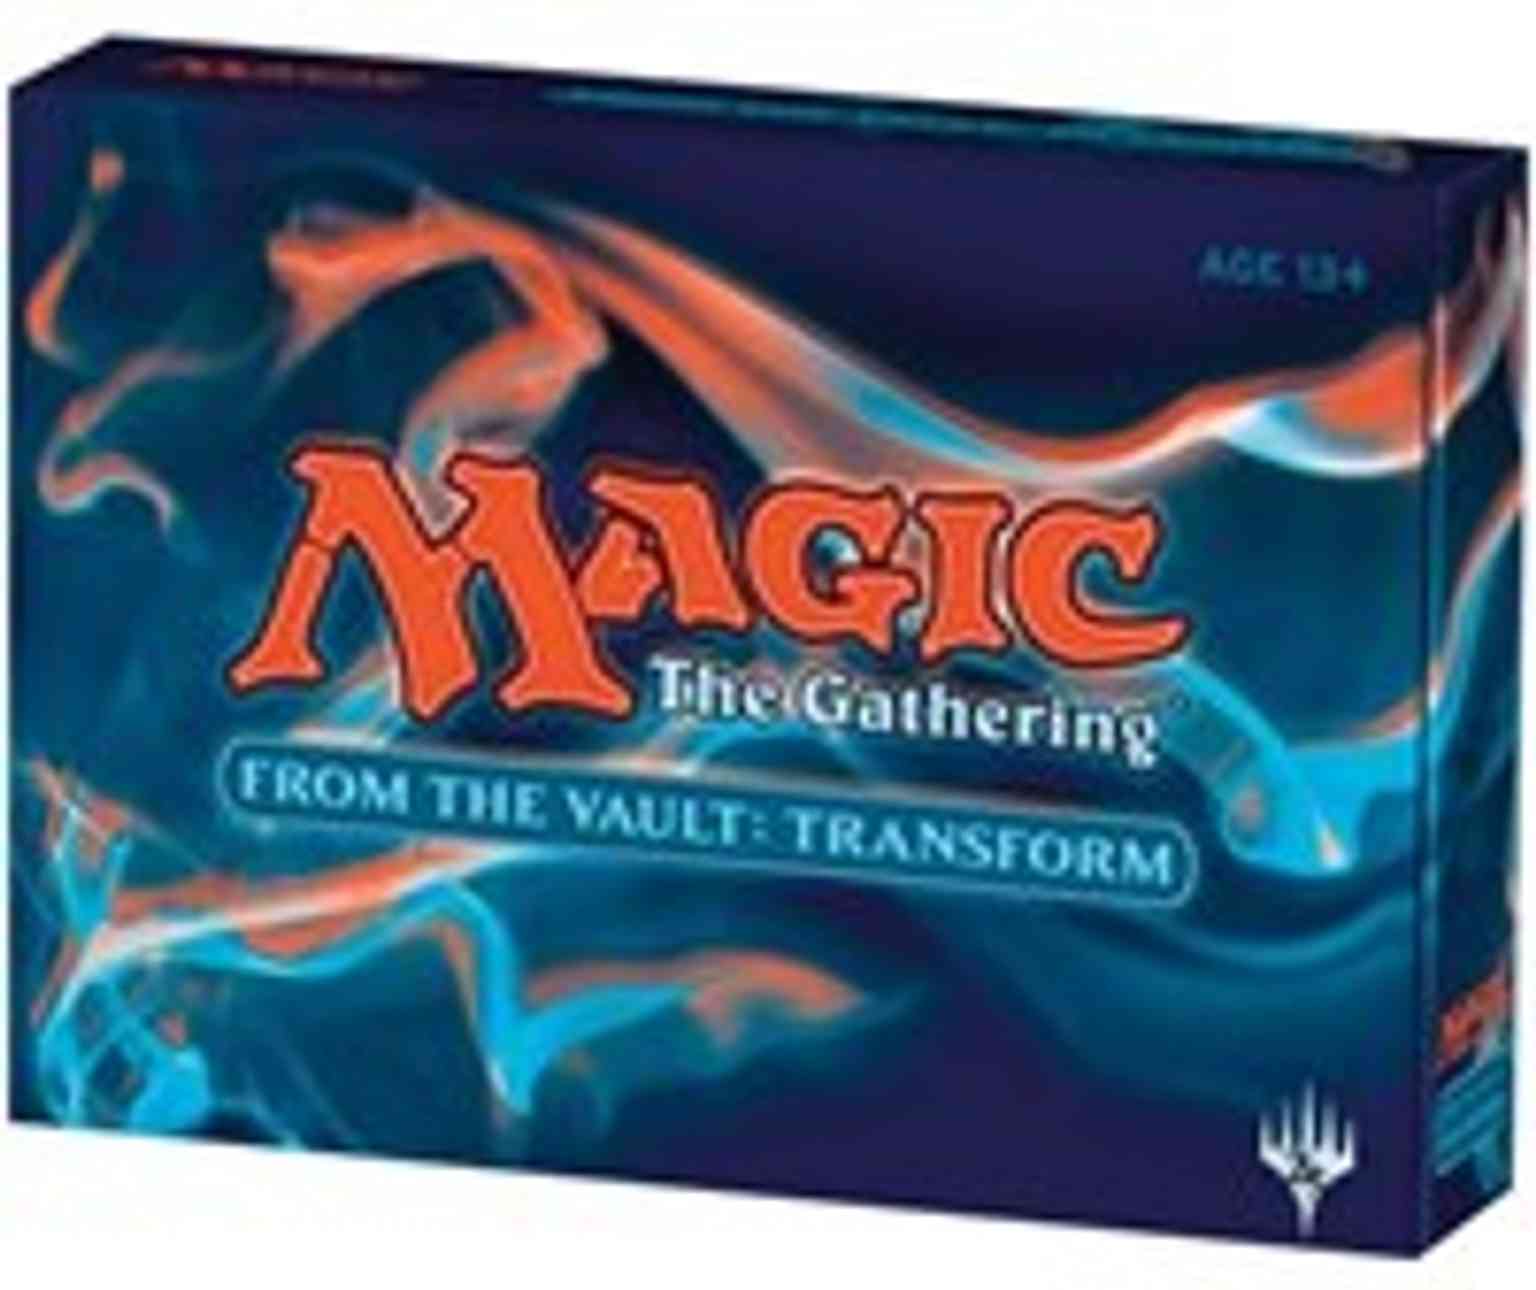 From the Vault: Transform - Box Set magic card front